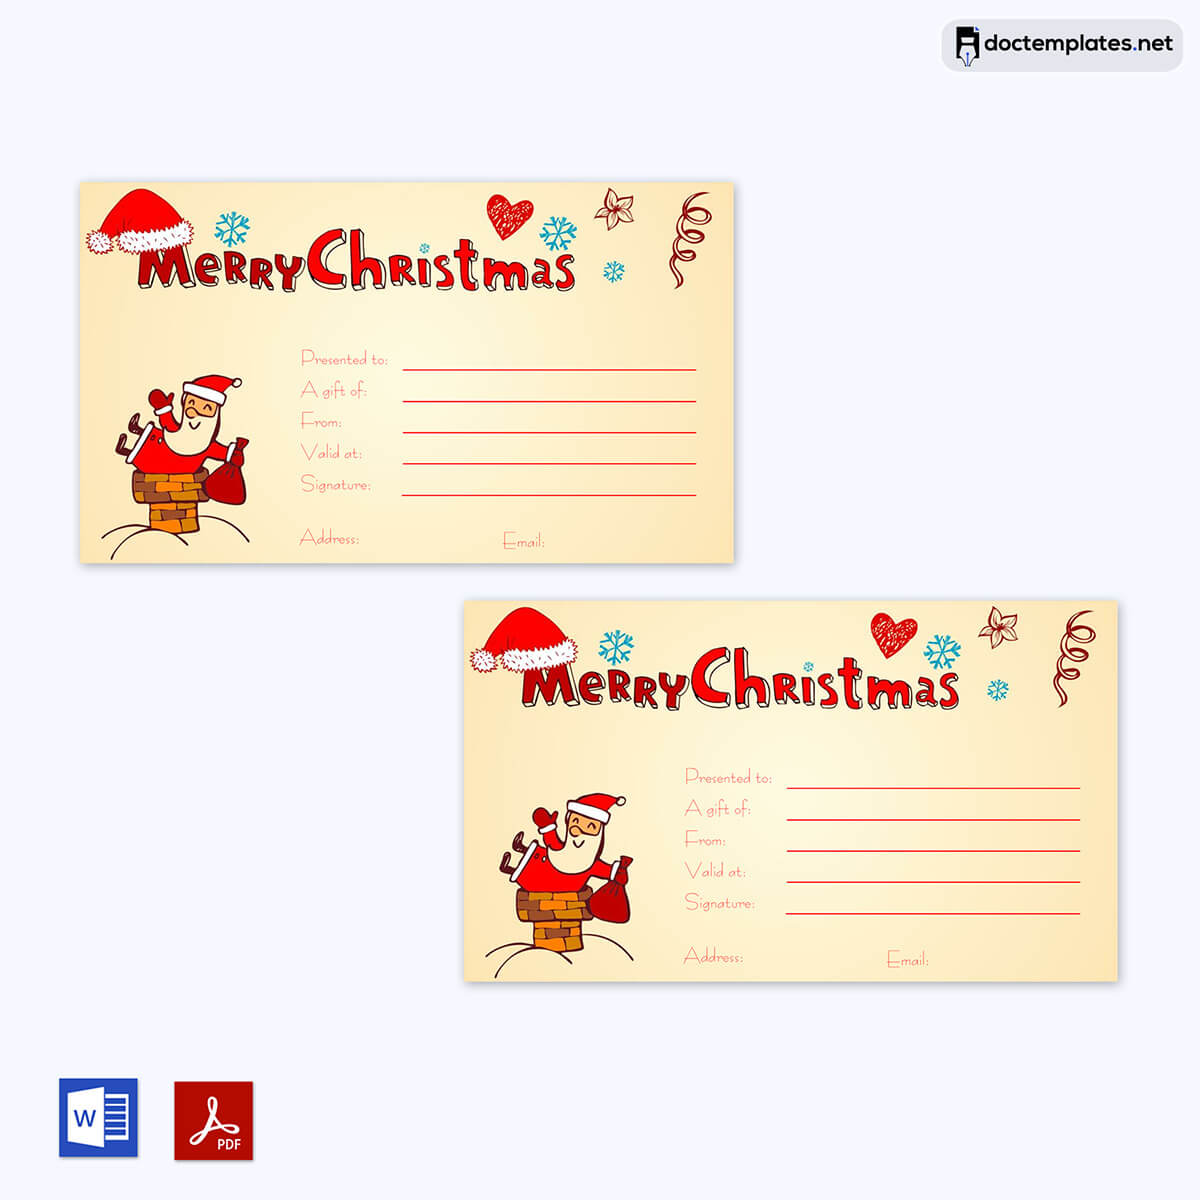 Image of Free Christmas gift certificate template Free Christmas gift certificate template 01